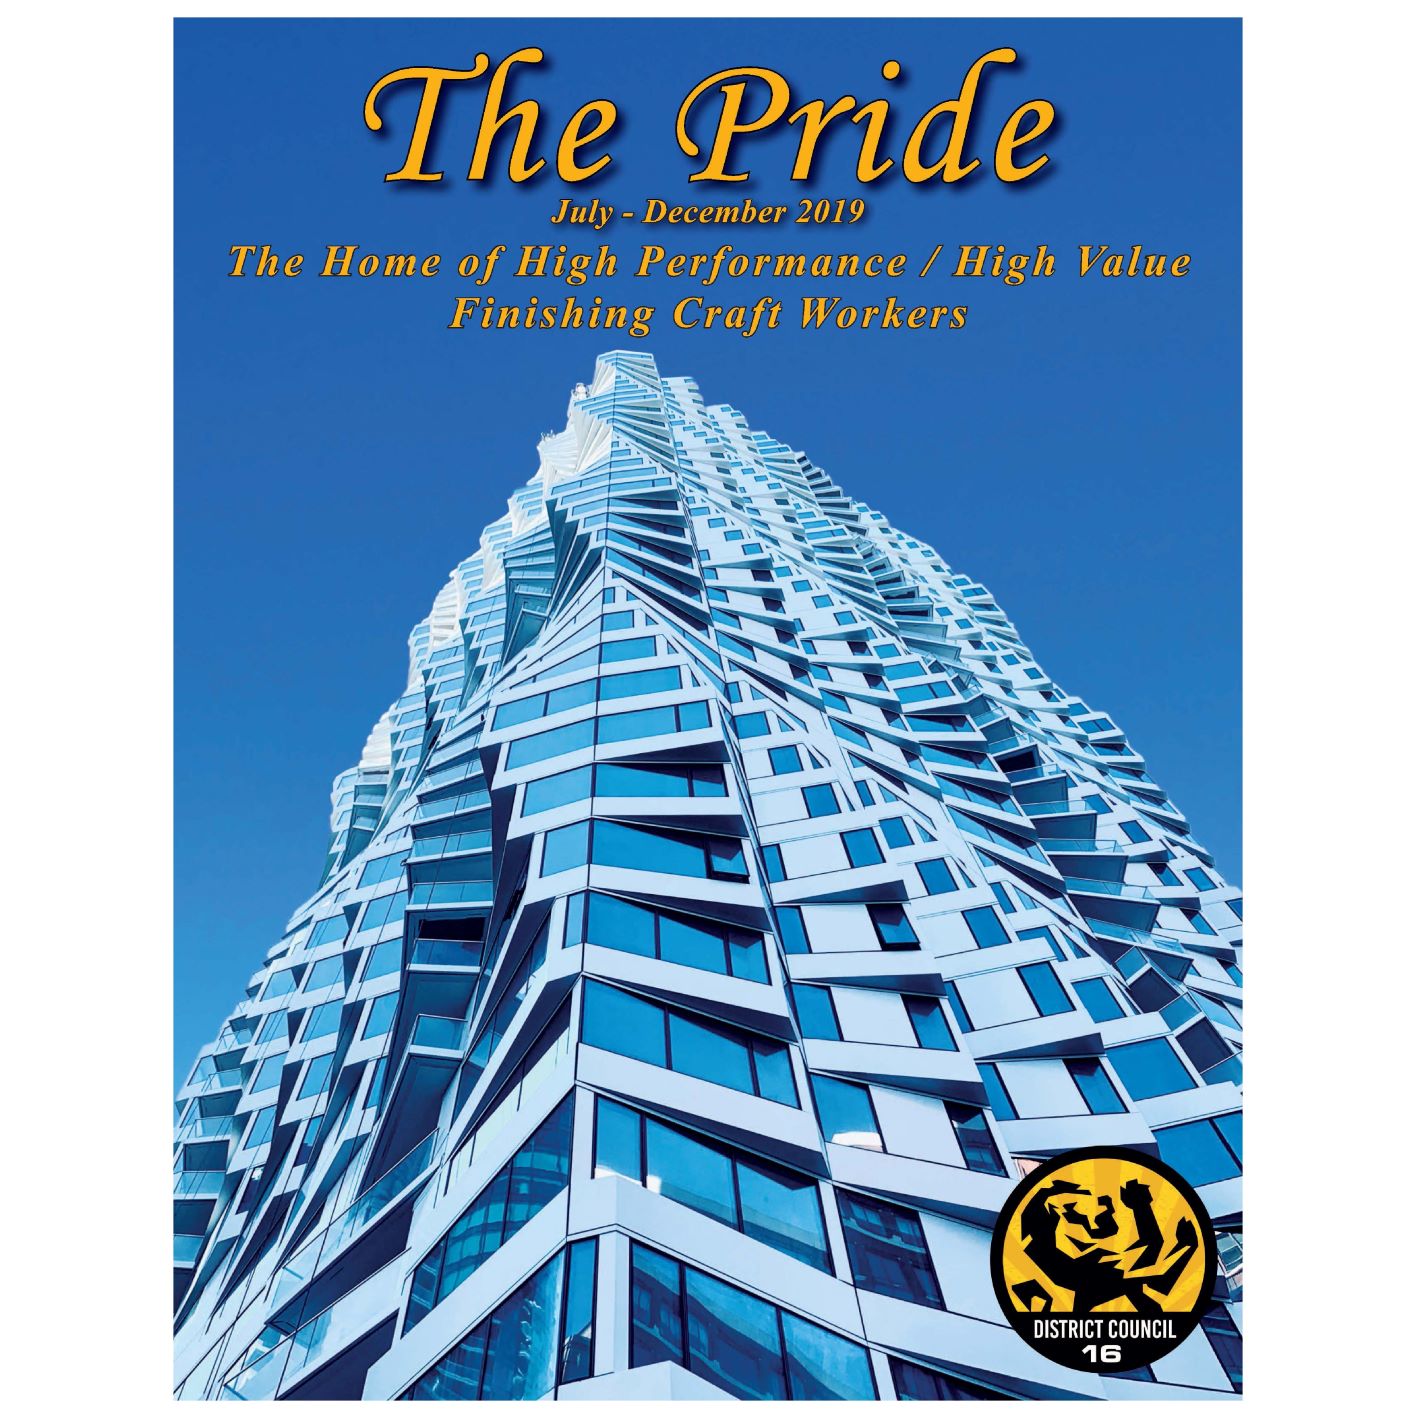 Image from the Gallery: THE PRIDE JULY – DECEMBER 2019